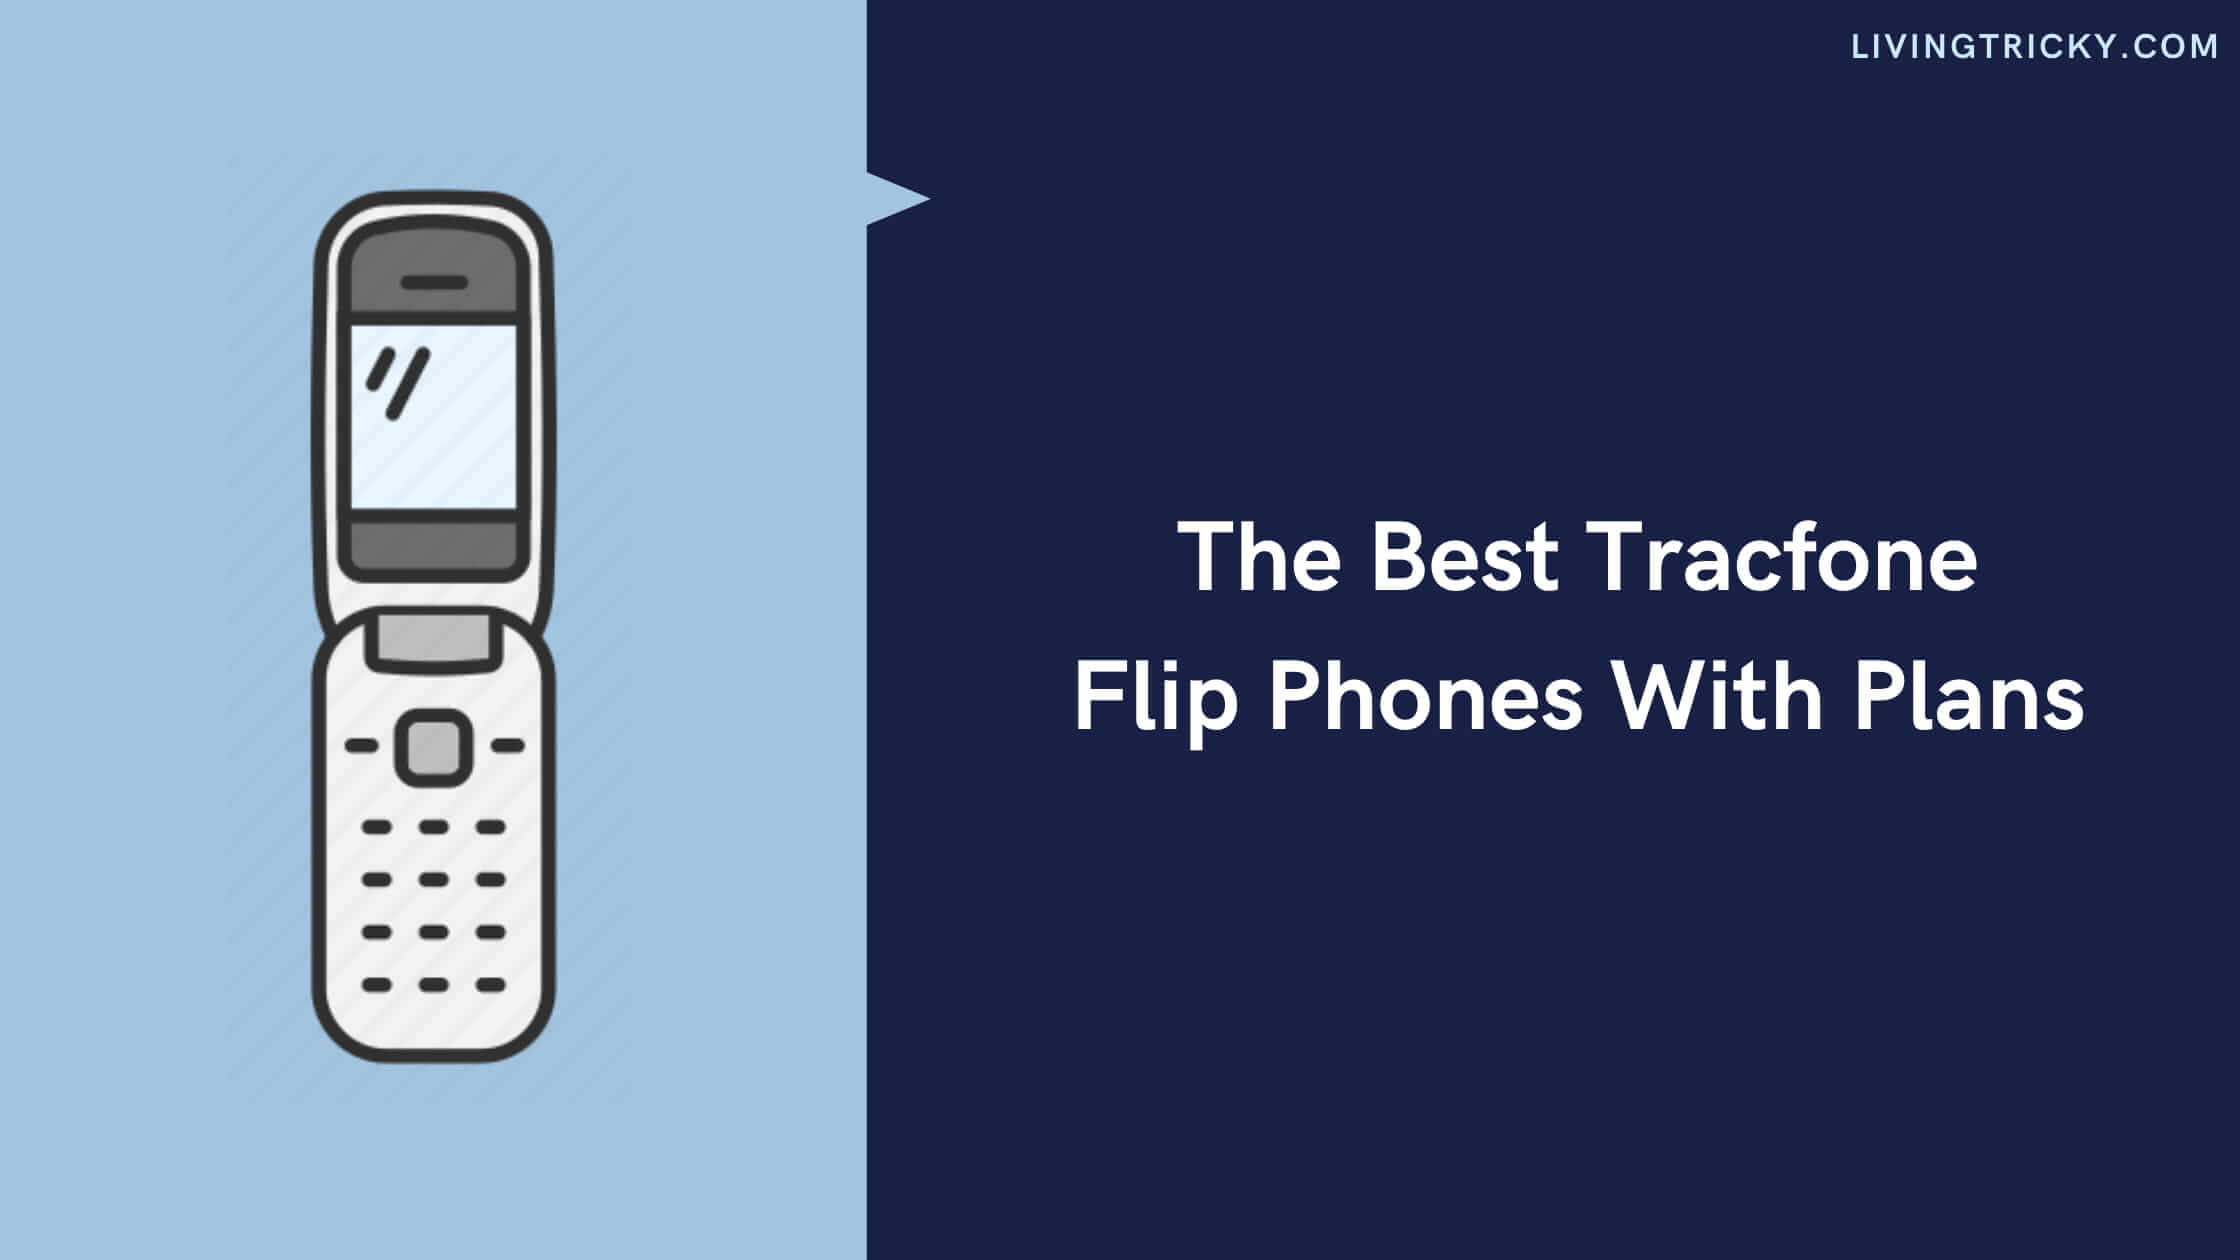 The Best Tracfone Flip Phones With Plans